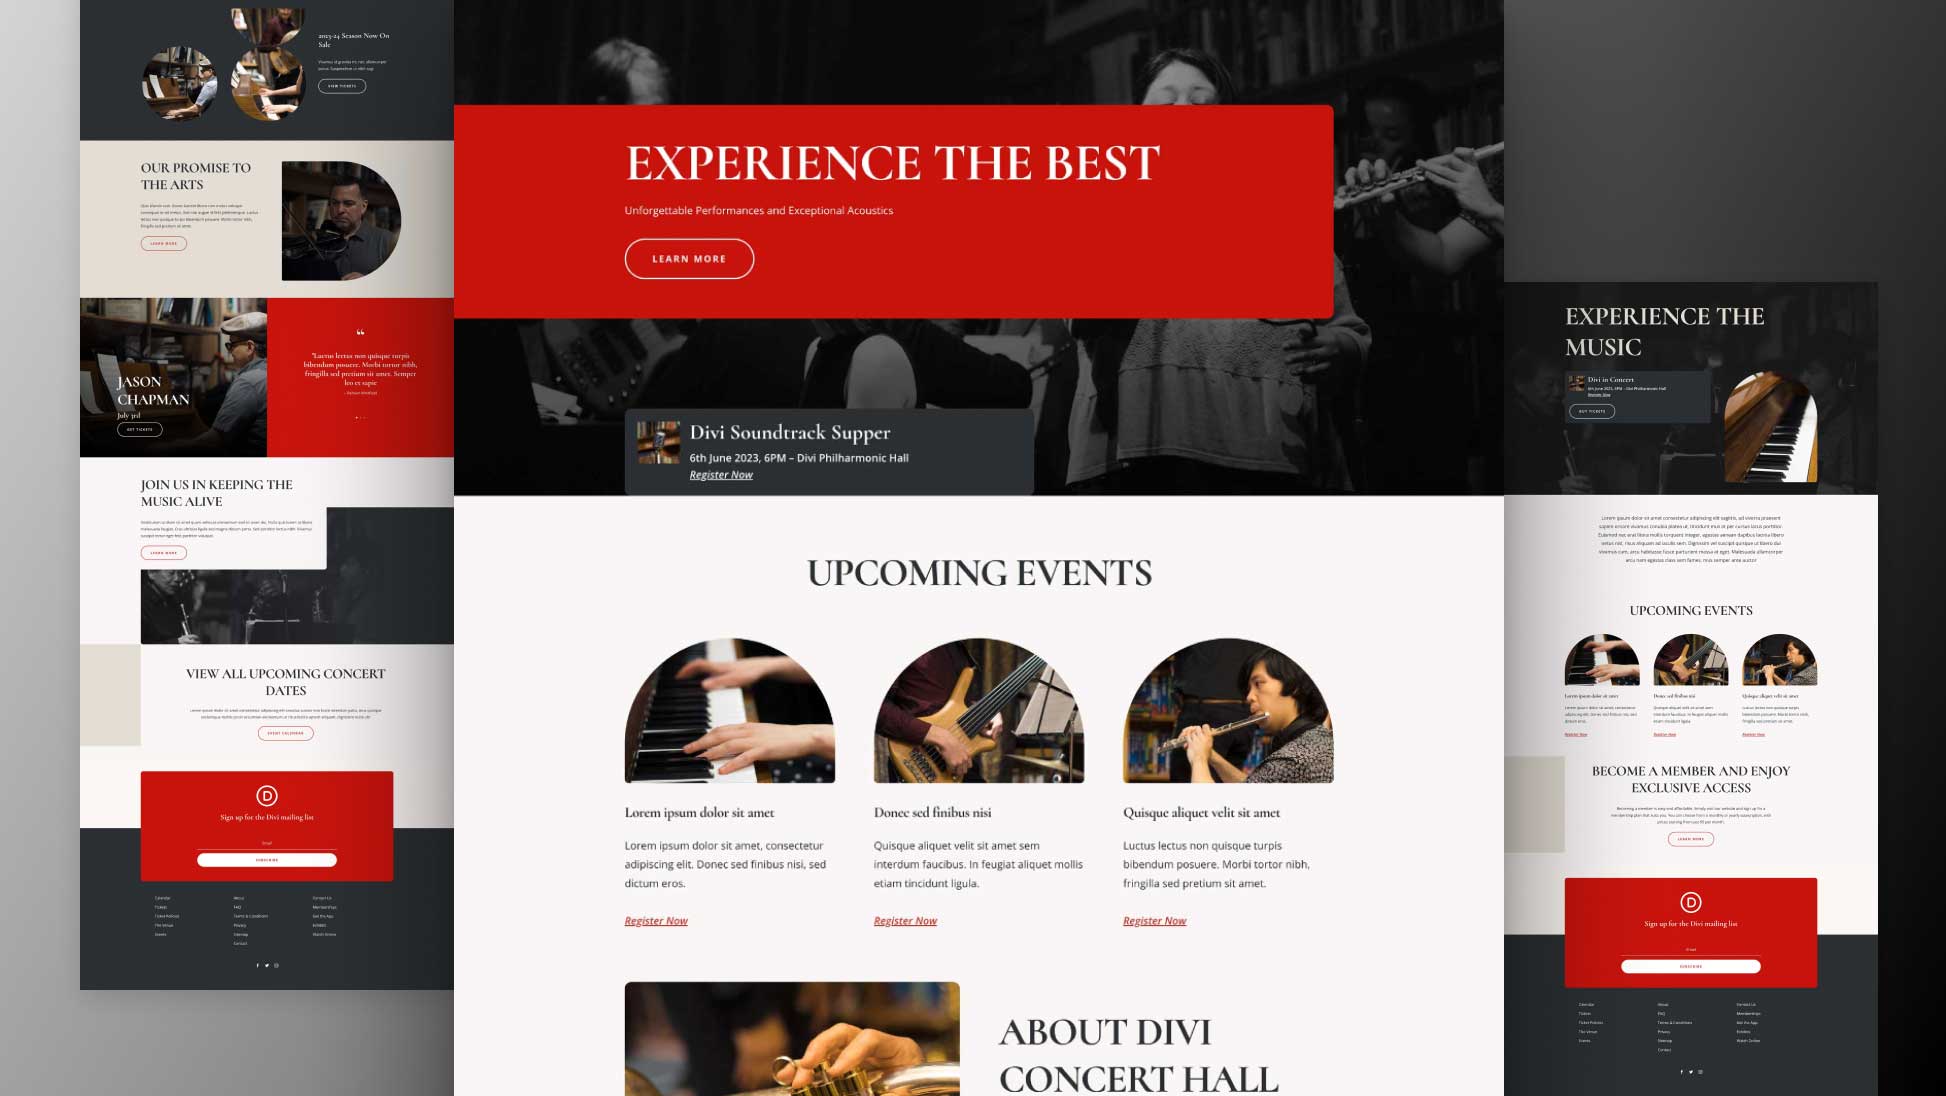 Get a Free Concert Hall Layout Pack for Divi